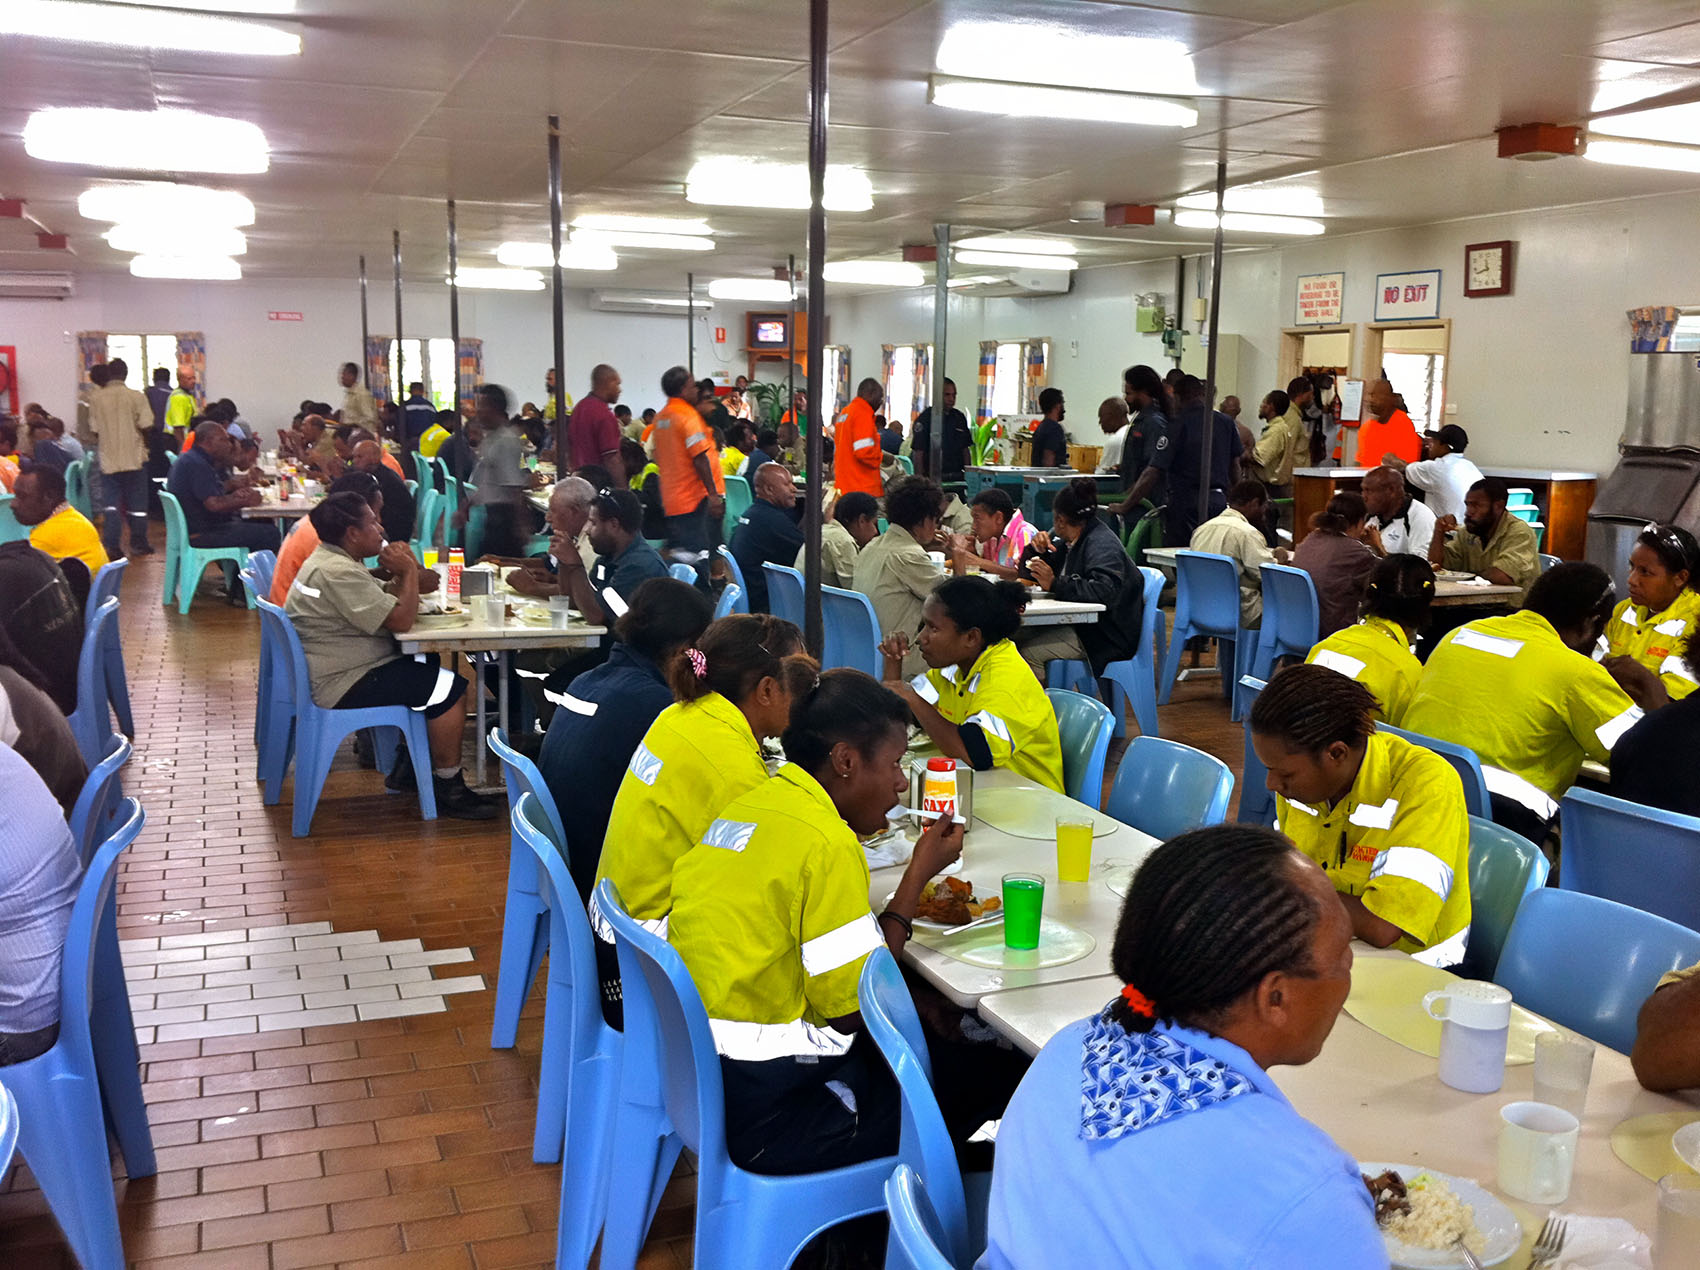 Fly-in fly-out workers in west Africa eat lunch at a messing hall in a modular structure